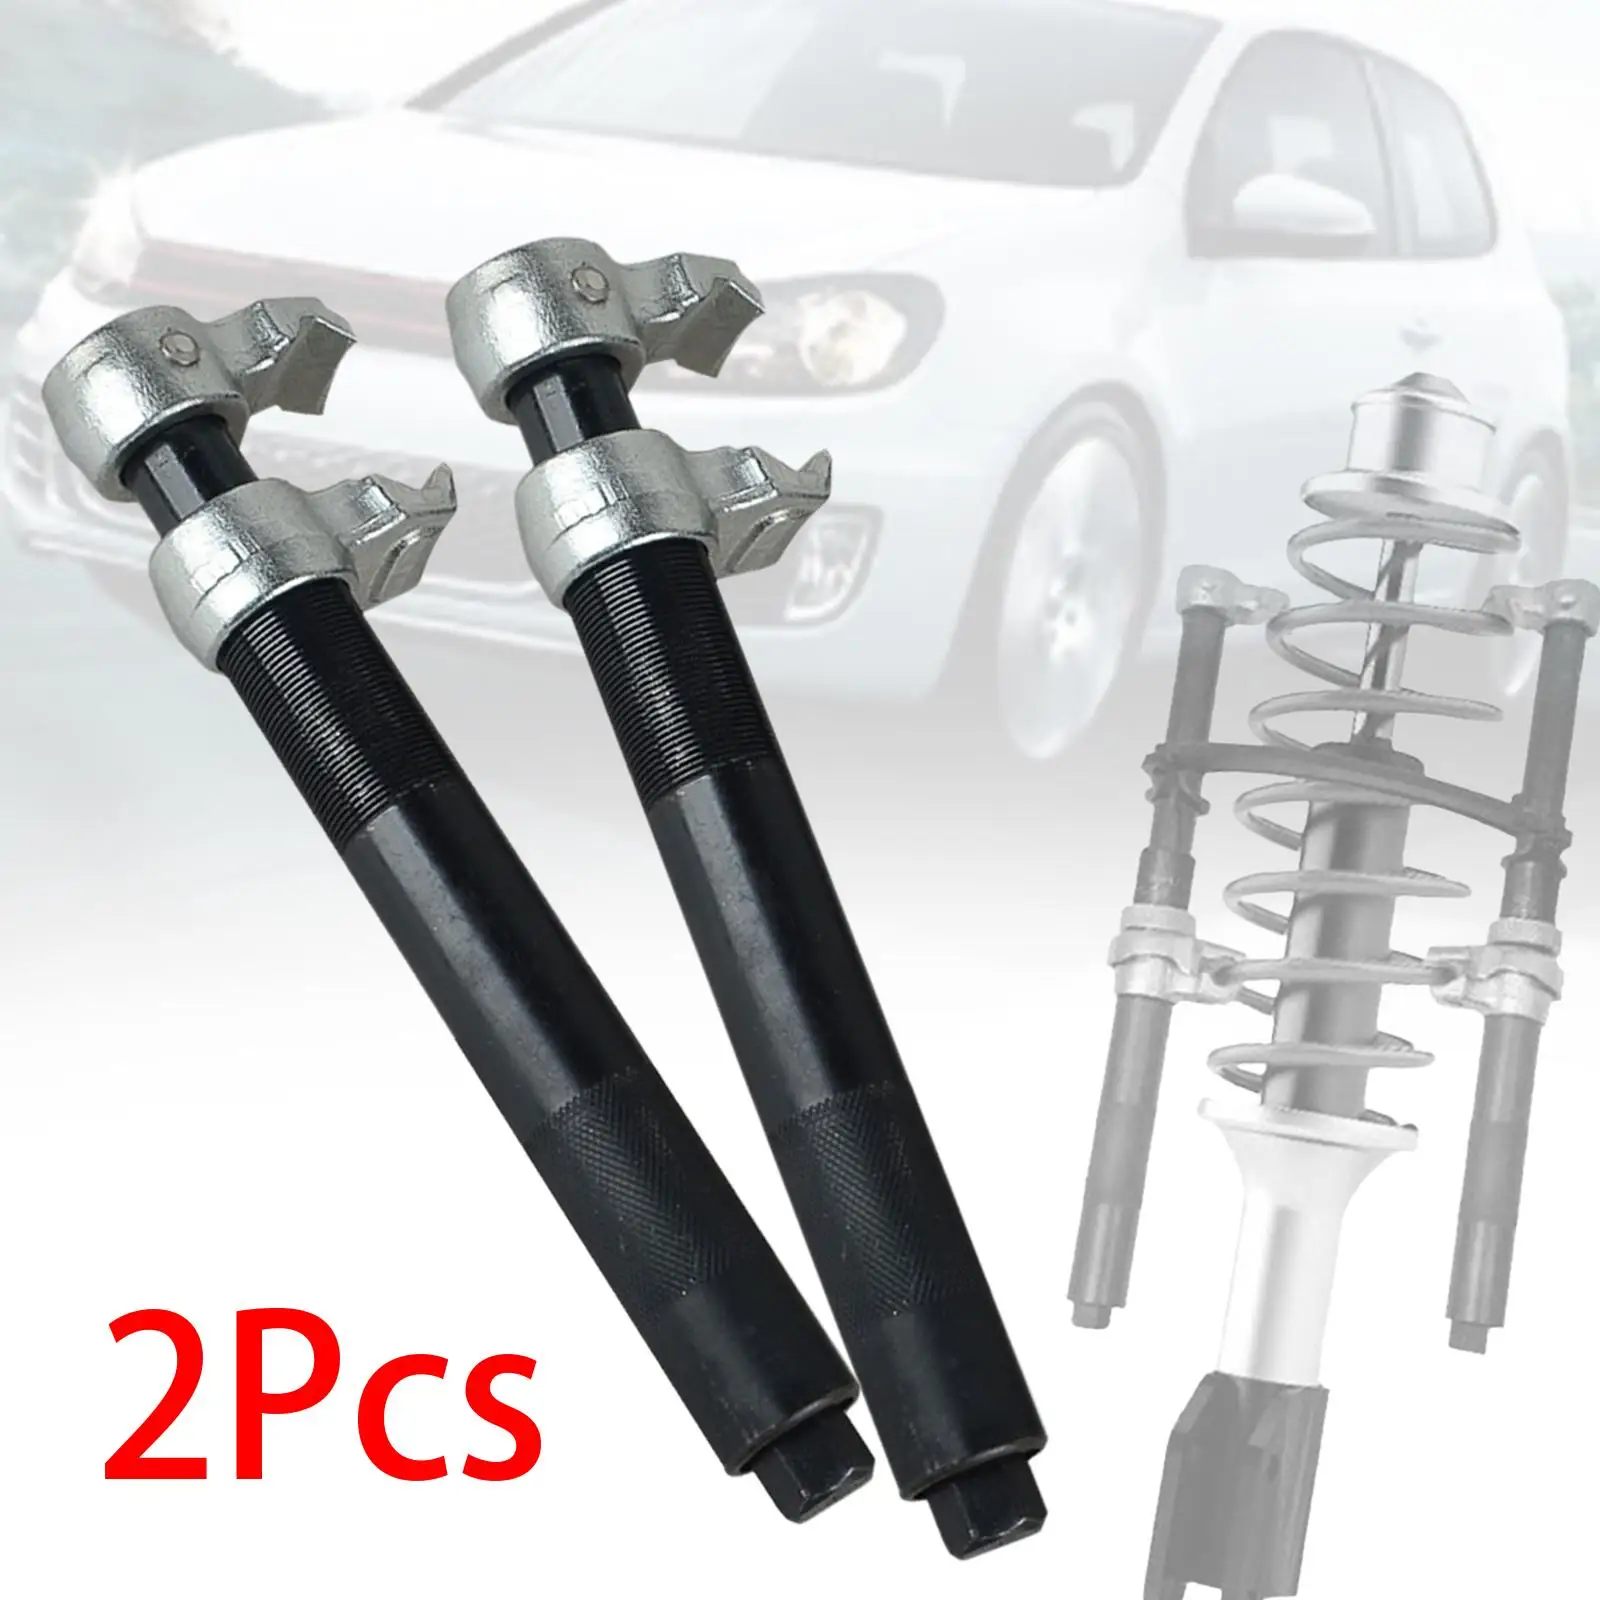 Compressor Adjustable Replacement Easy to Install Spare Parts Car Heavy Duty Durable High Performance Spring Spacer